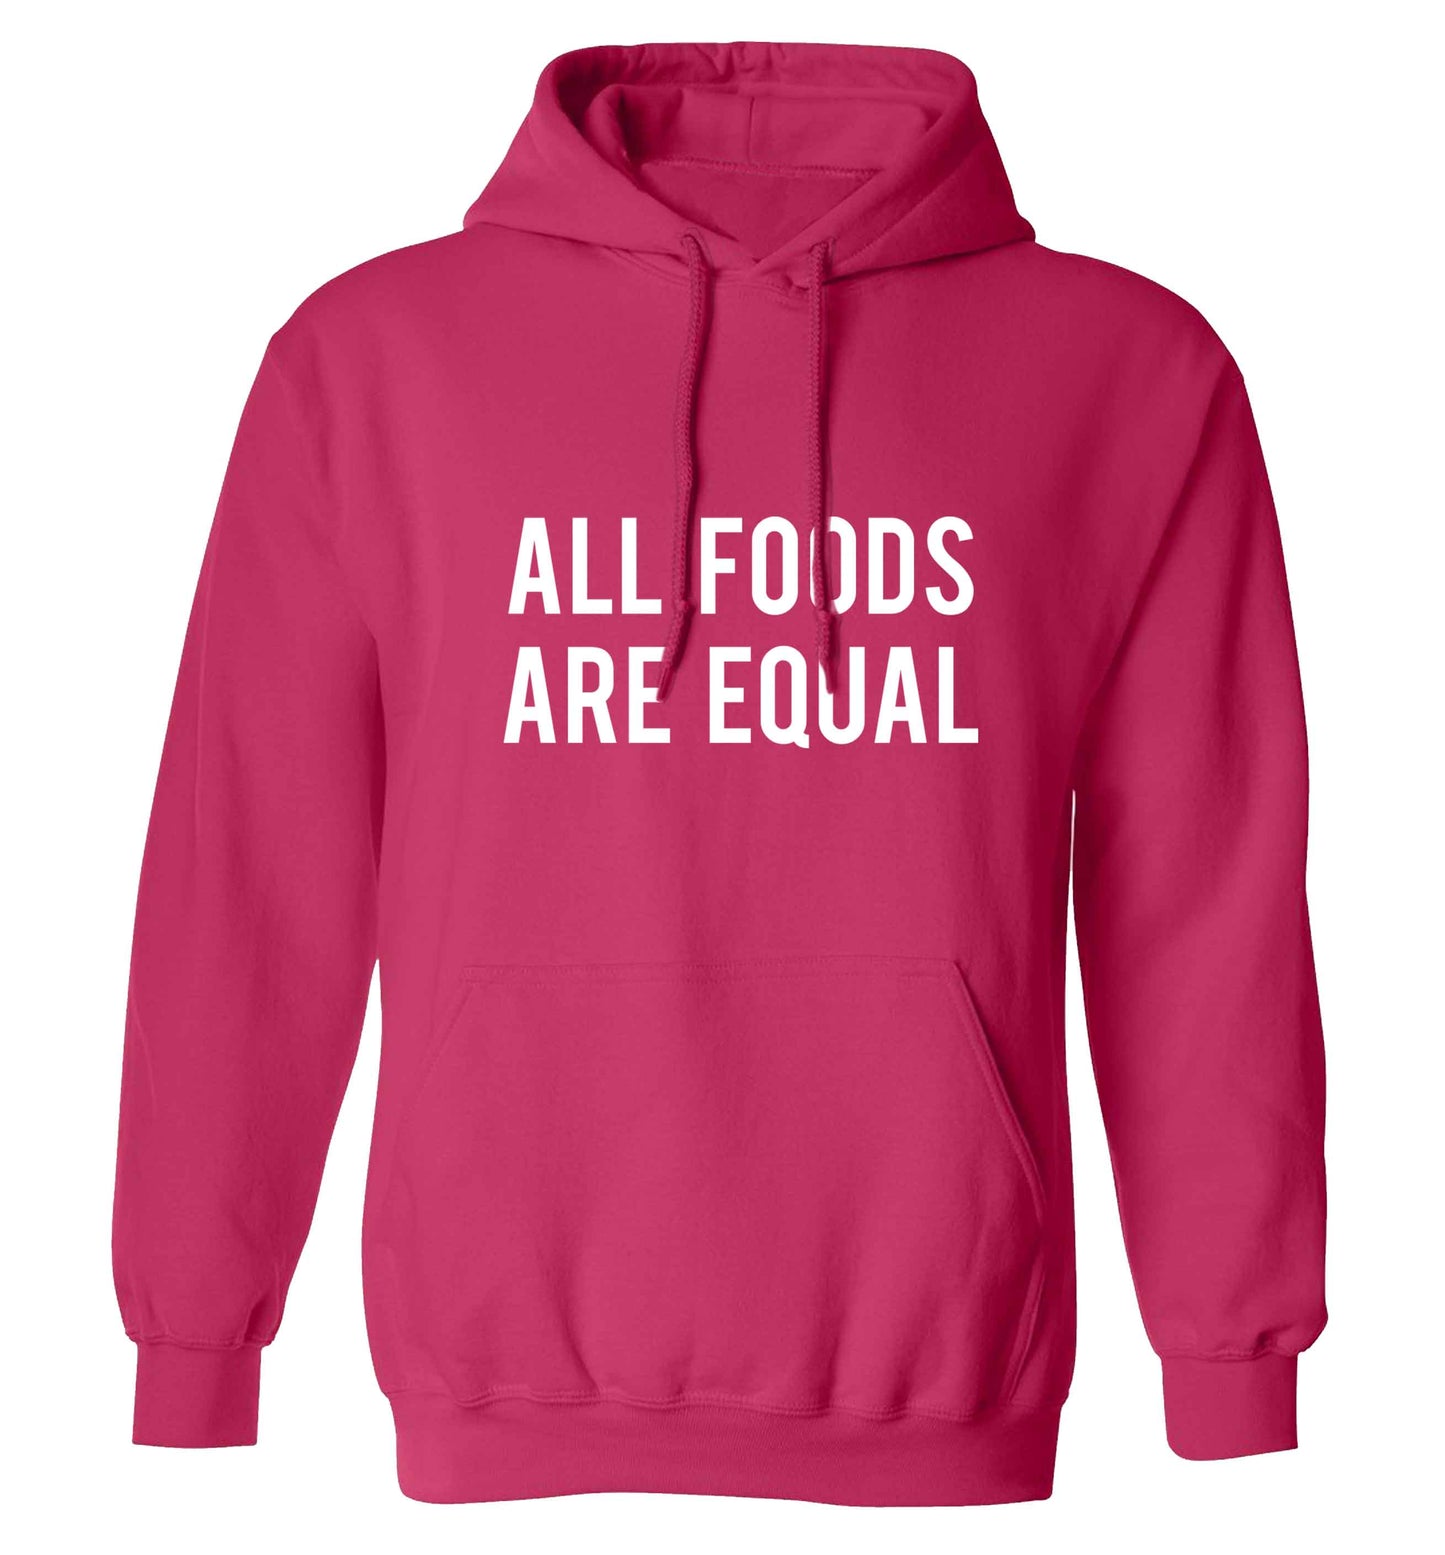 All foods are equal adults unisex pink hoodie 2XL